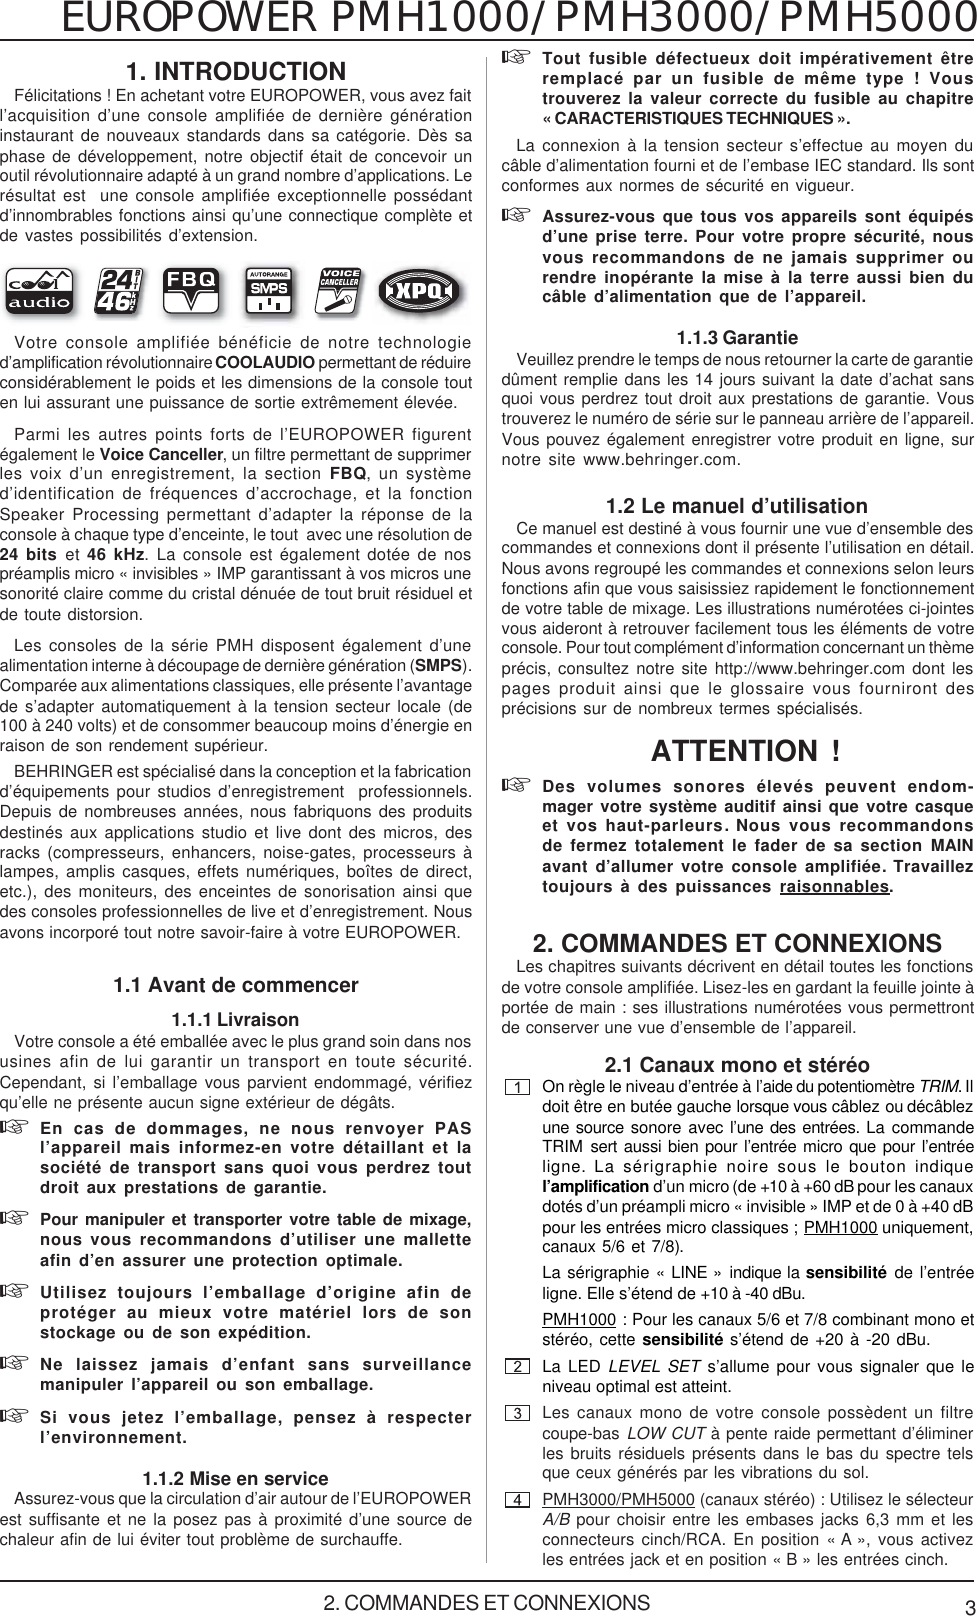 Page 3 of 12 - Behringer PMH1000 User Manual (French) P0115 M FR